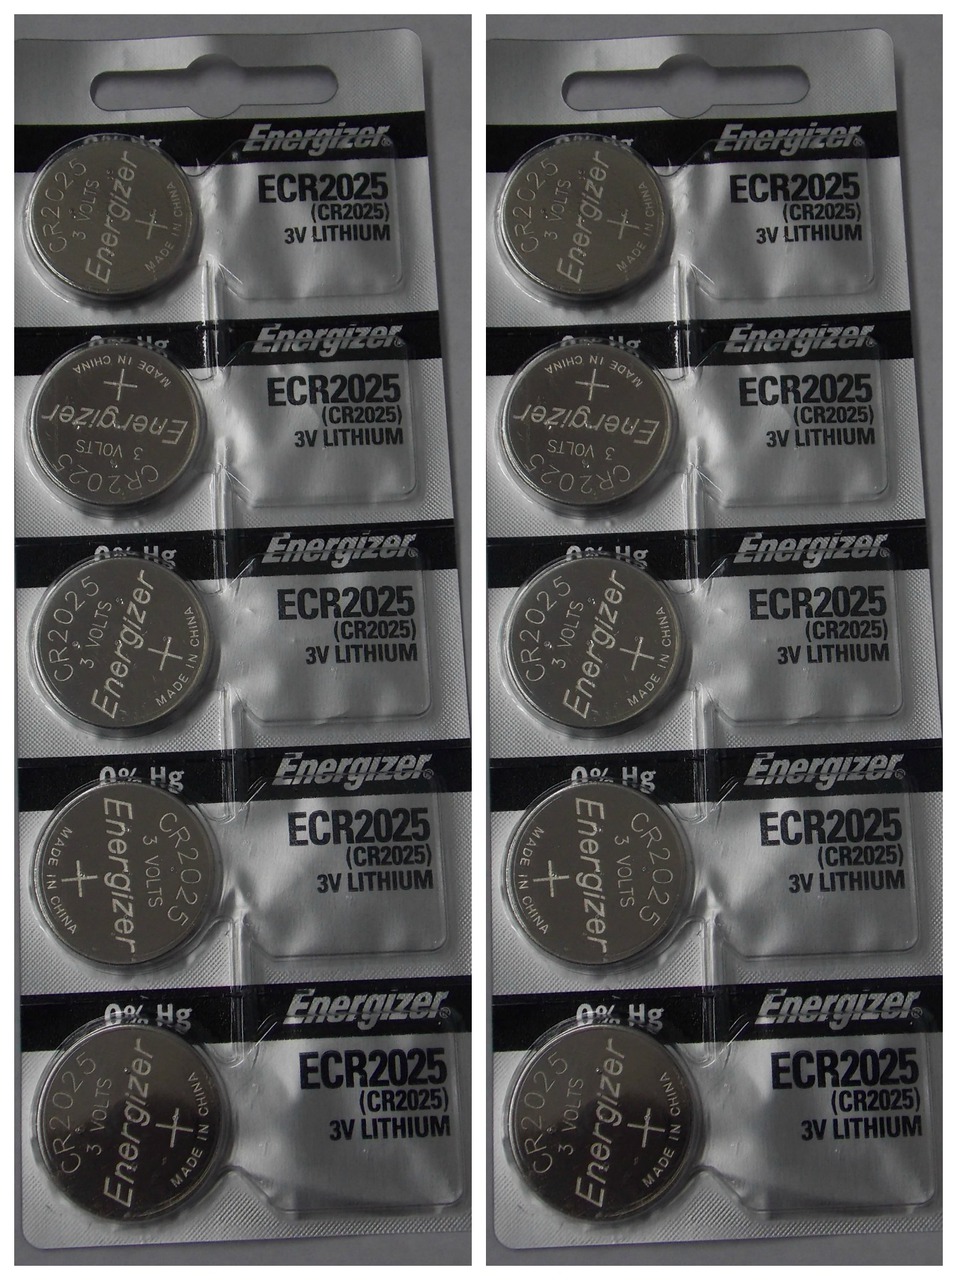 Energizer CR2025 3V Lithium Coin Battery - 10 Pack + FREE SHIPPING